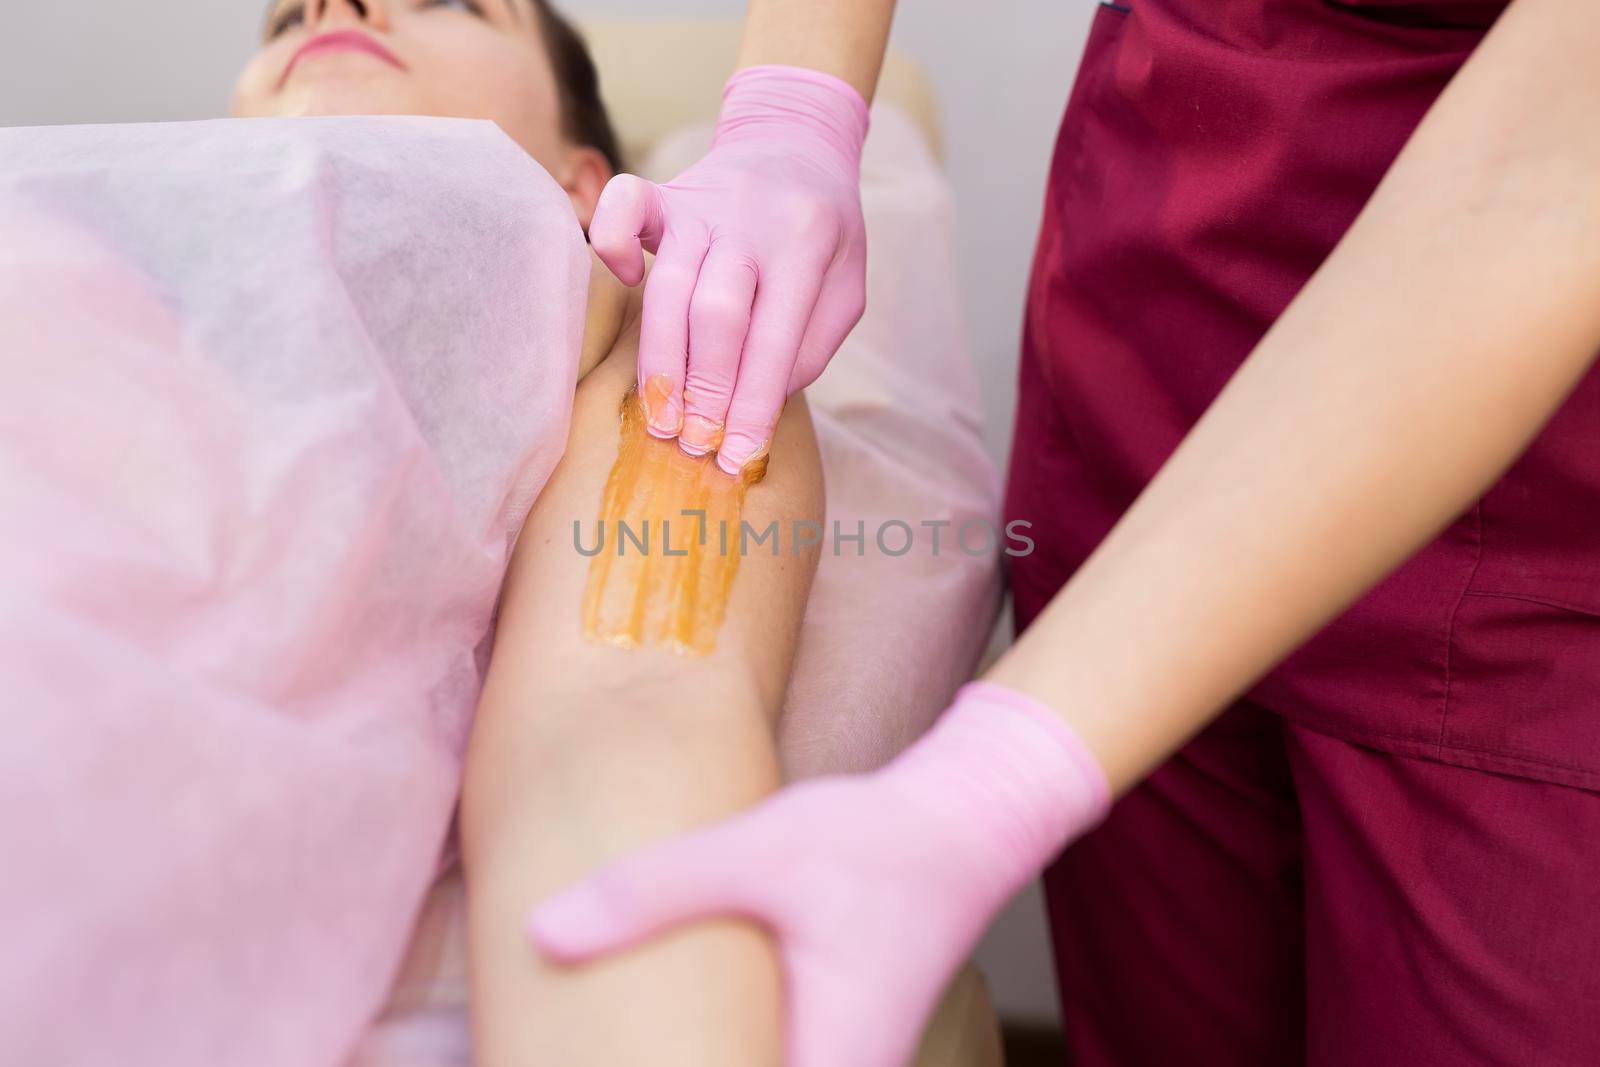 Close-up of a shugaring master applying thick sugar paste on a young girl's hand, removing unwanted hair. Hair removal with a special sugar paste has many advantages over wax depilation. by StudioPeace